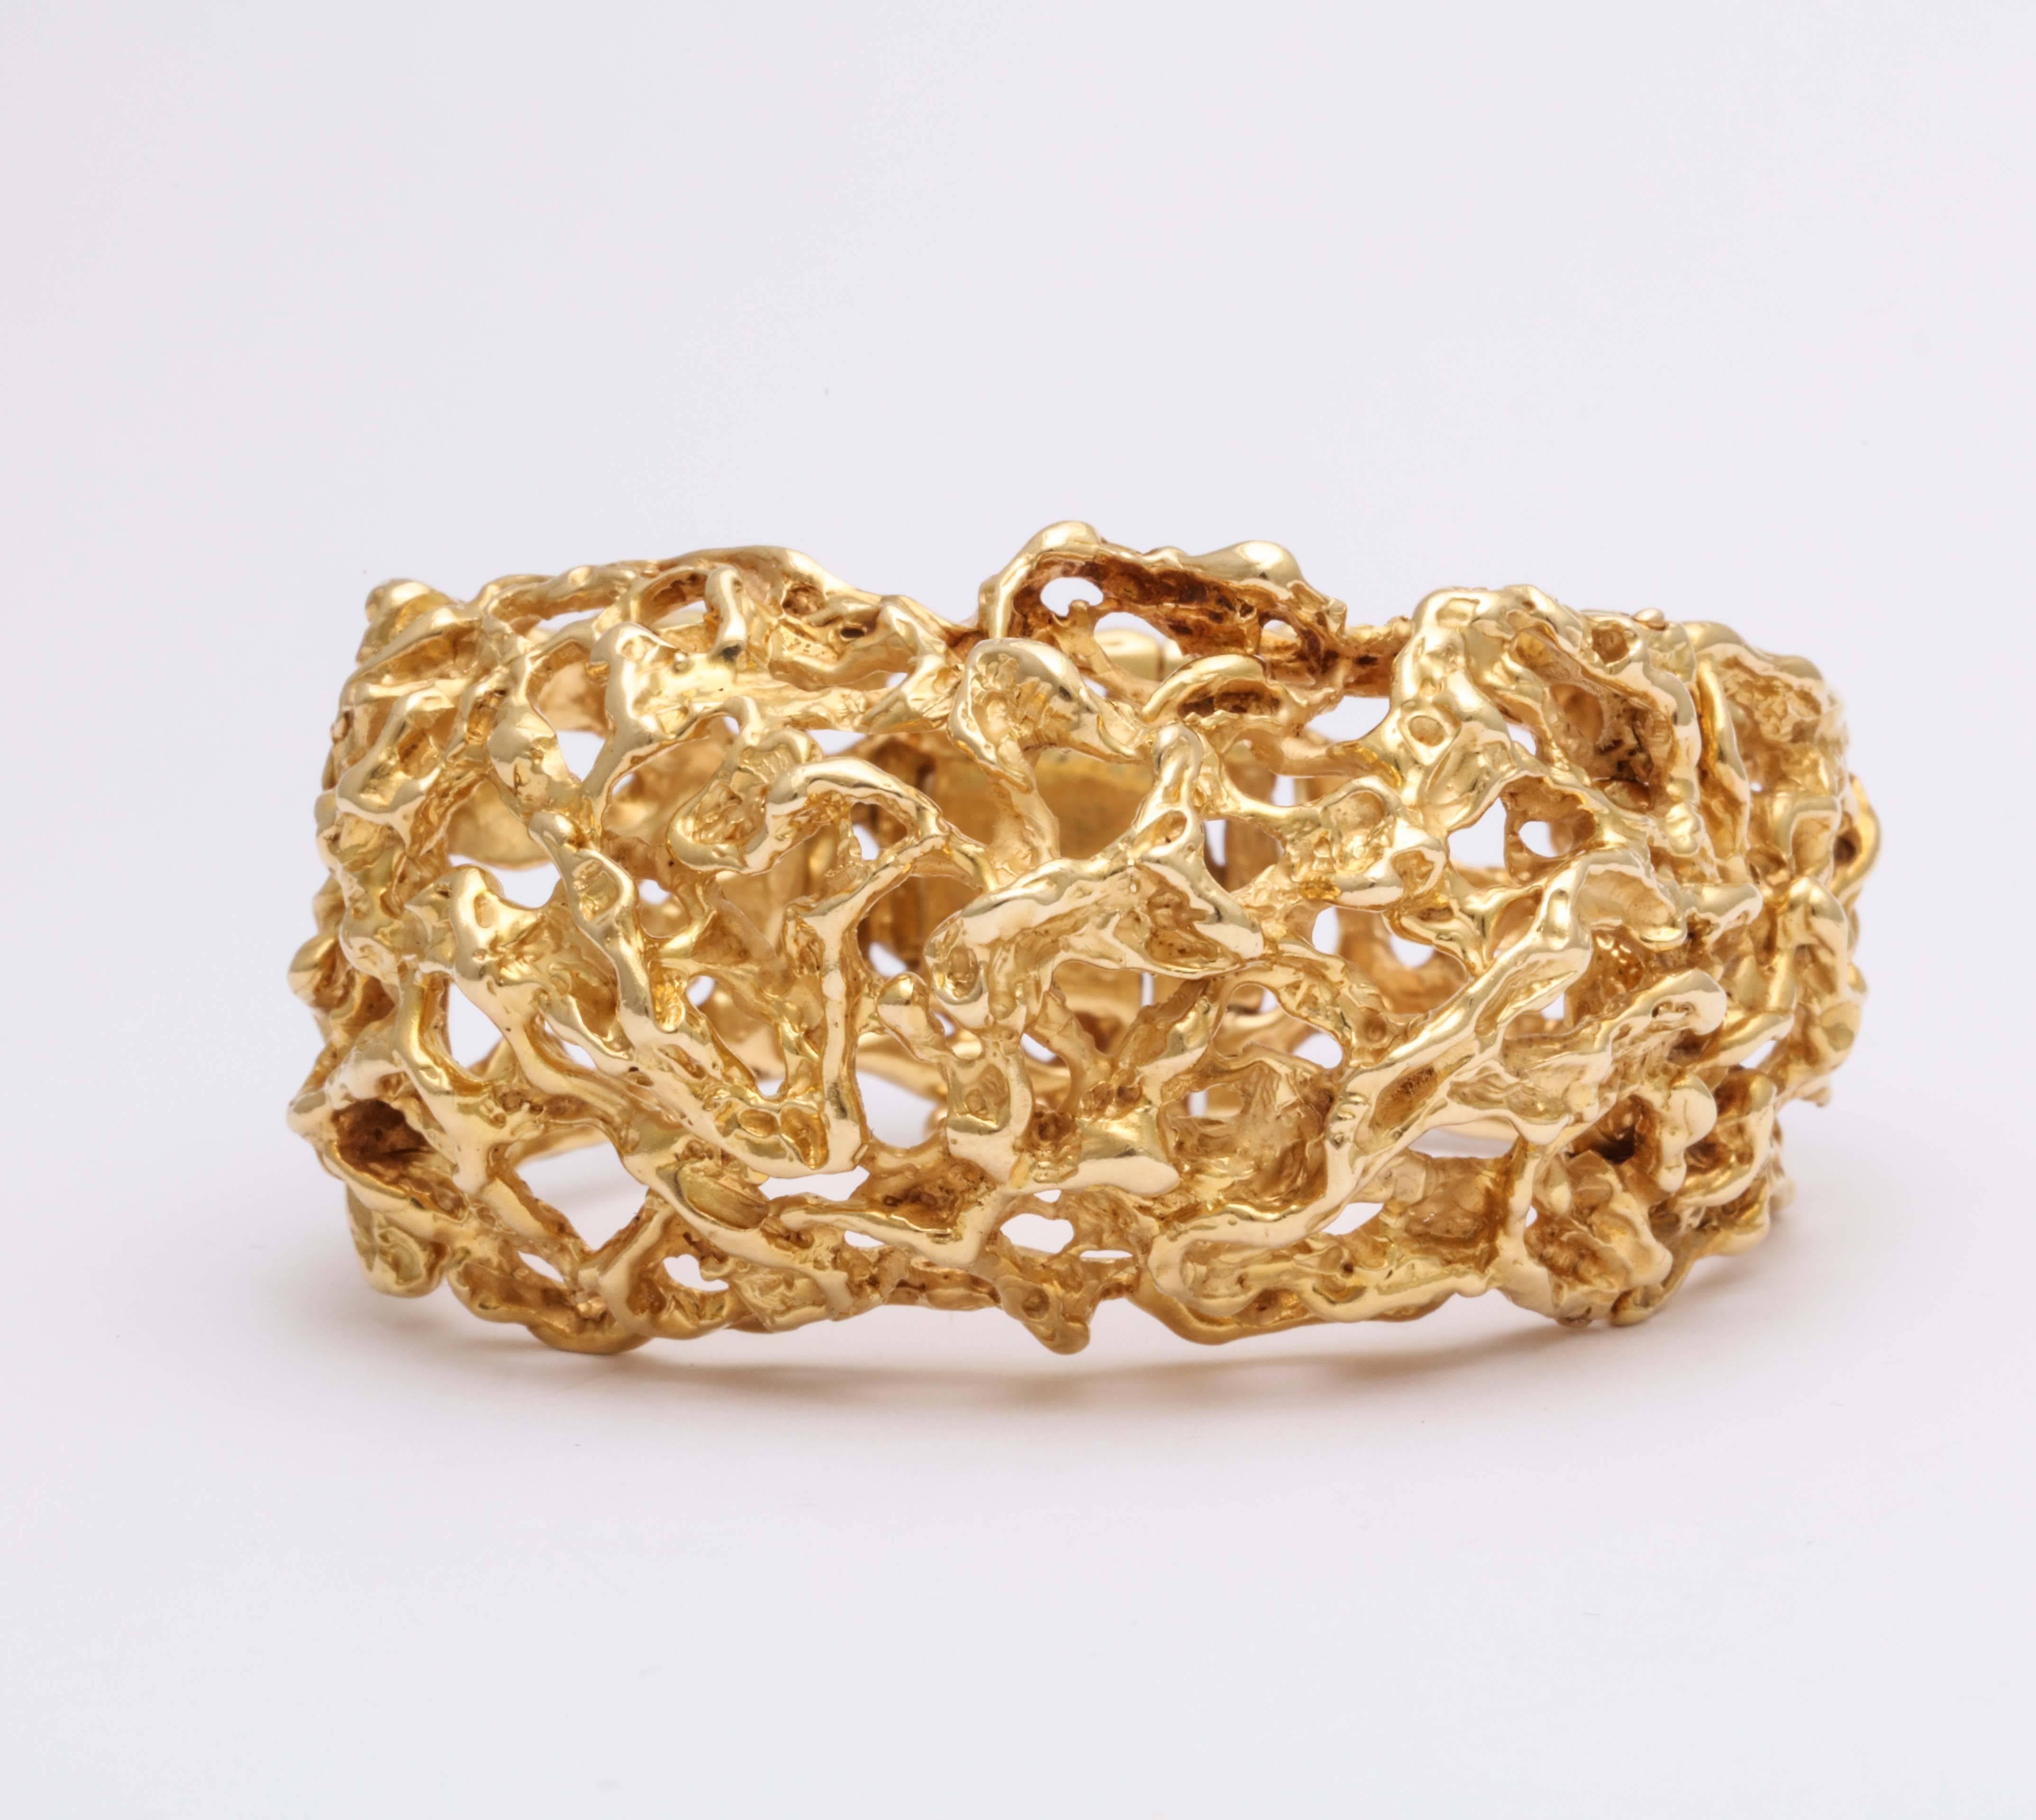 Wonderful openwork Bracelet with tabbed closing . Rigid - yet hinged in sections for mobility.  18kt Yellow Gold Center raised and then  hinged with two  flatter sections on either side.  Very organic. A classic work by this Greenwich Village Artist